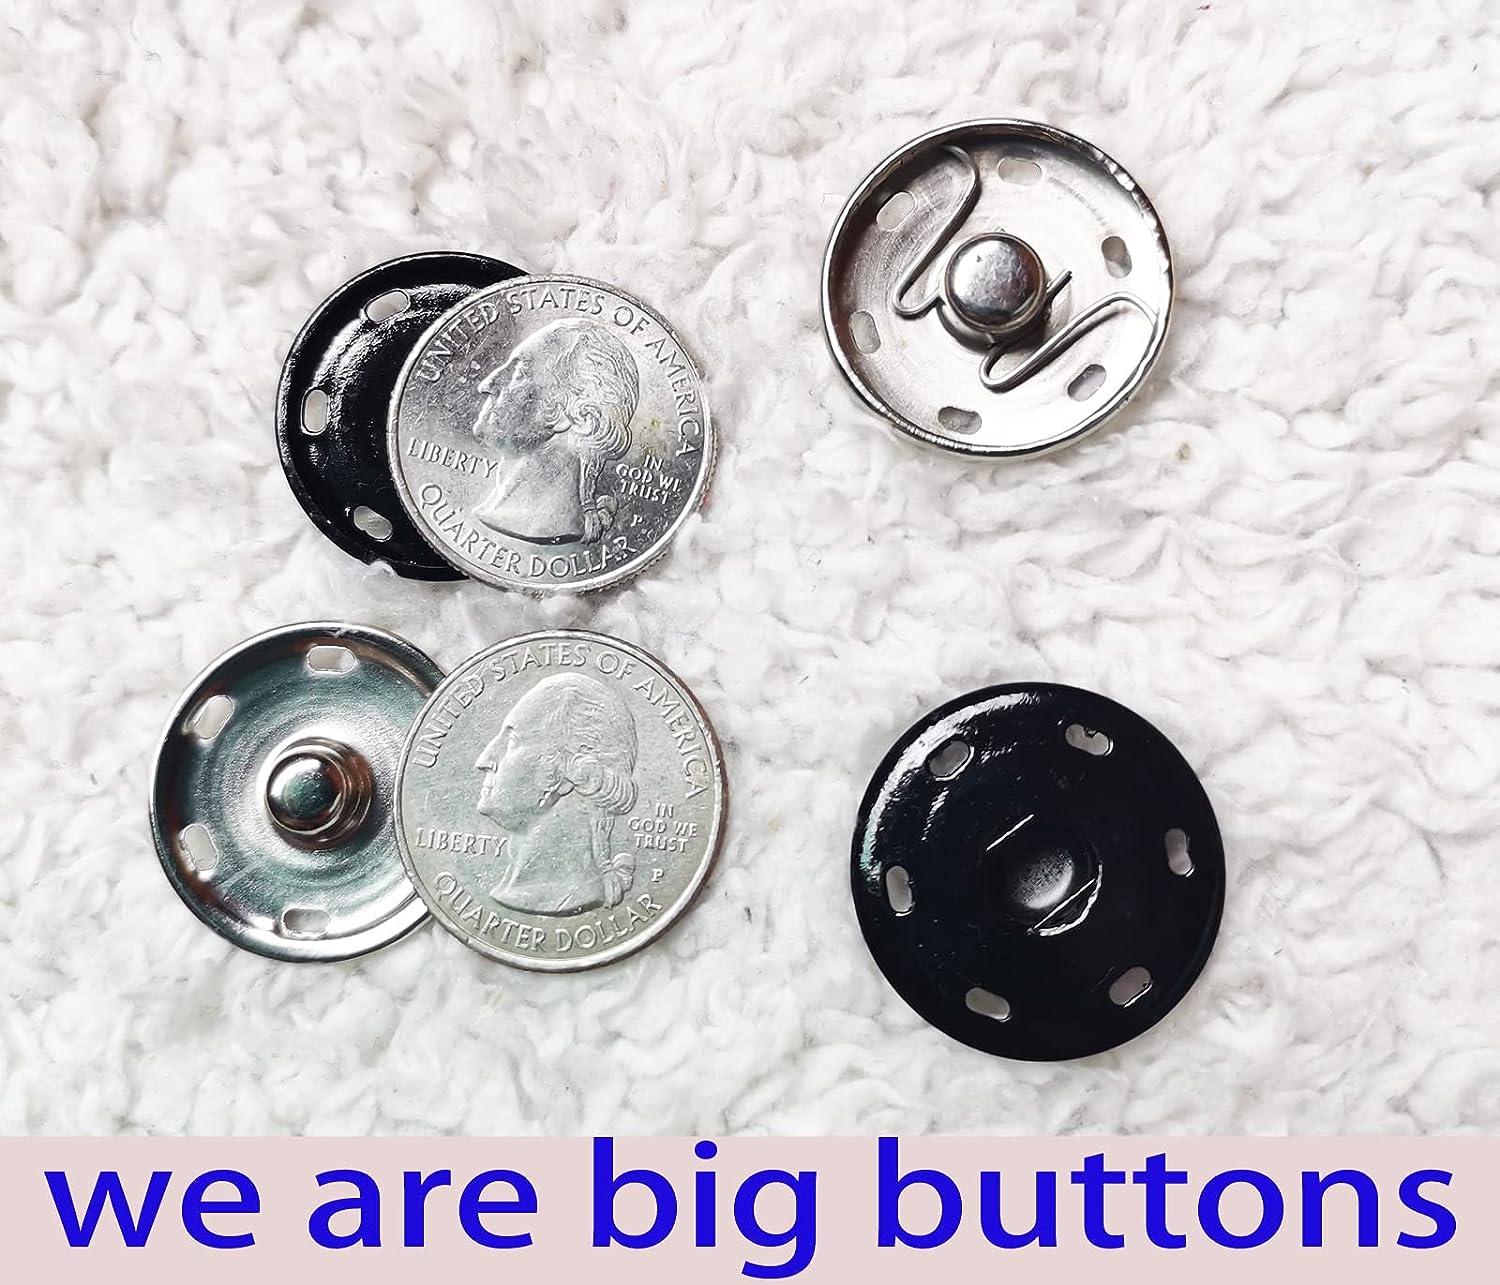 Plastic Snap Button Sewing Buttons for sale